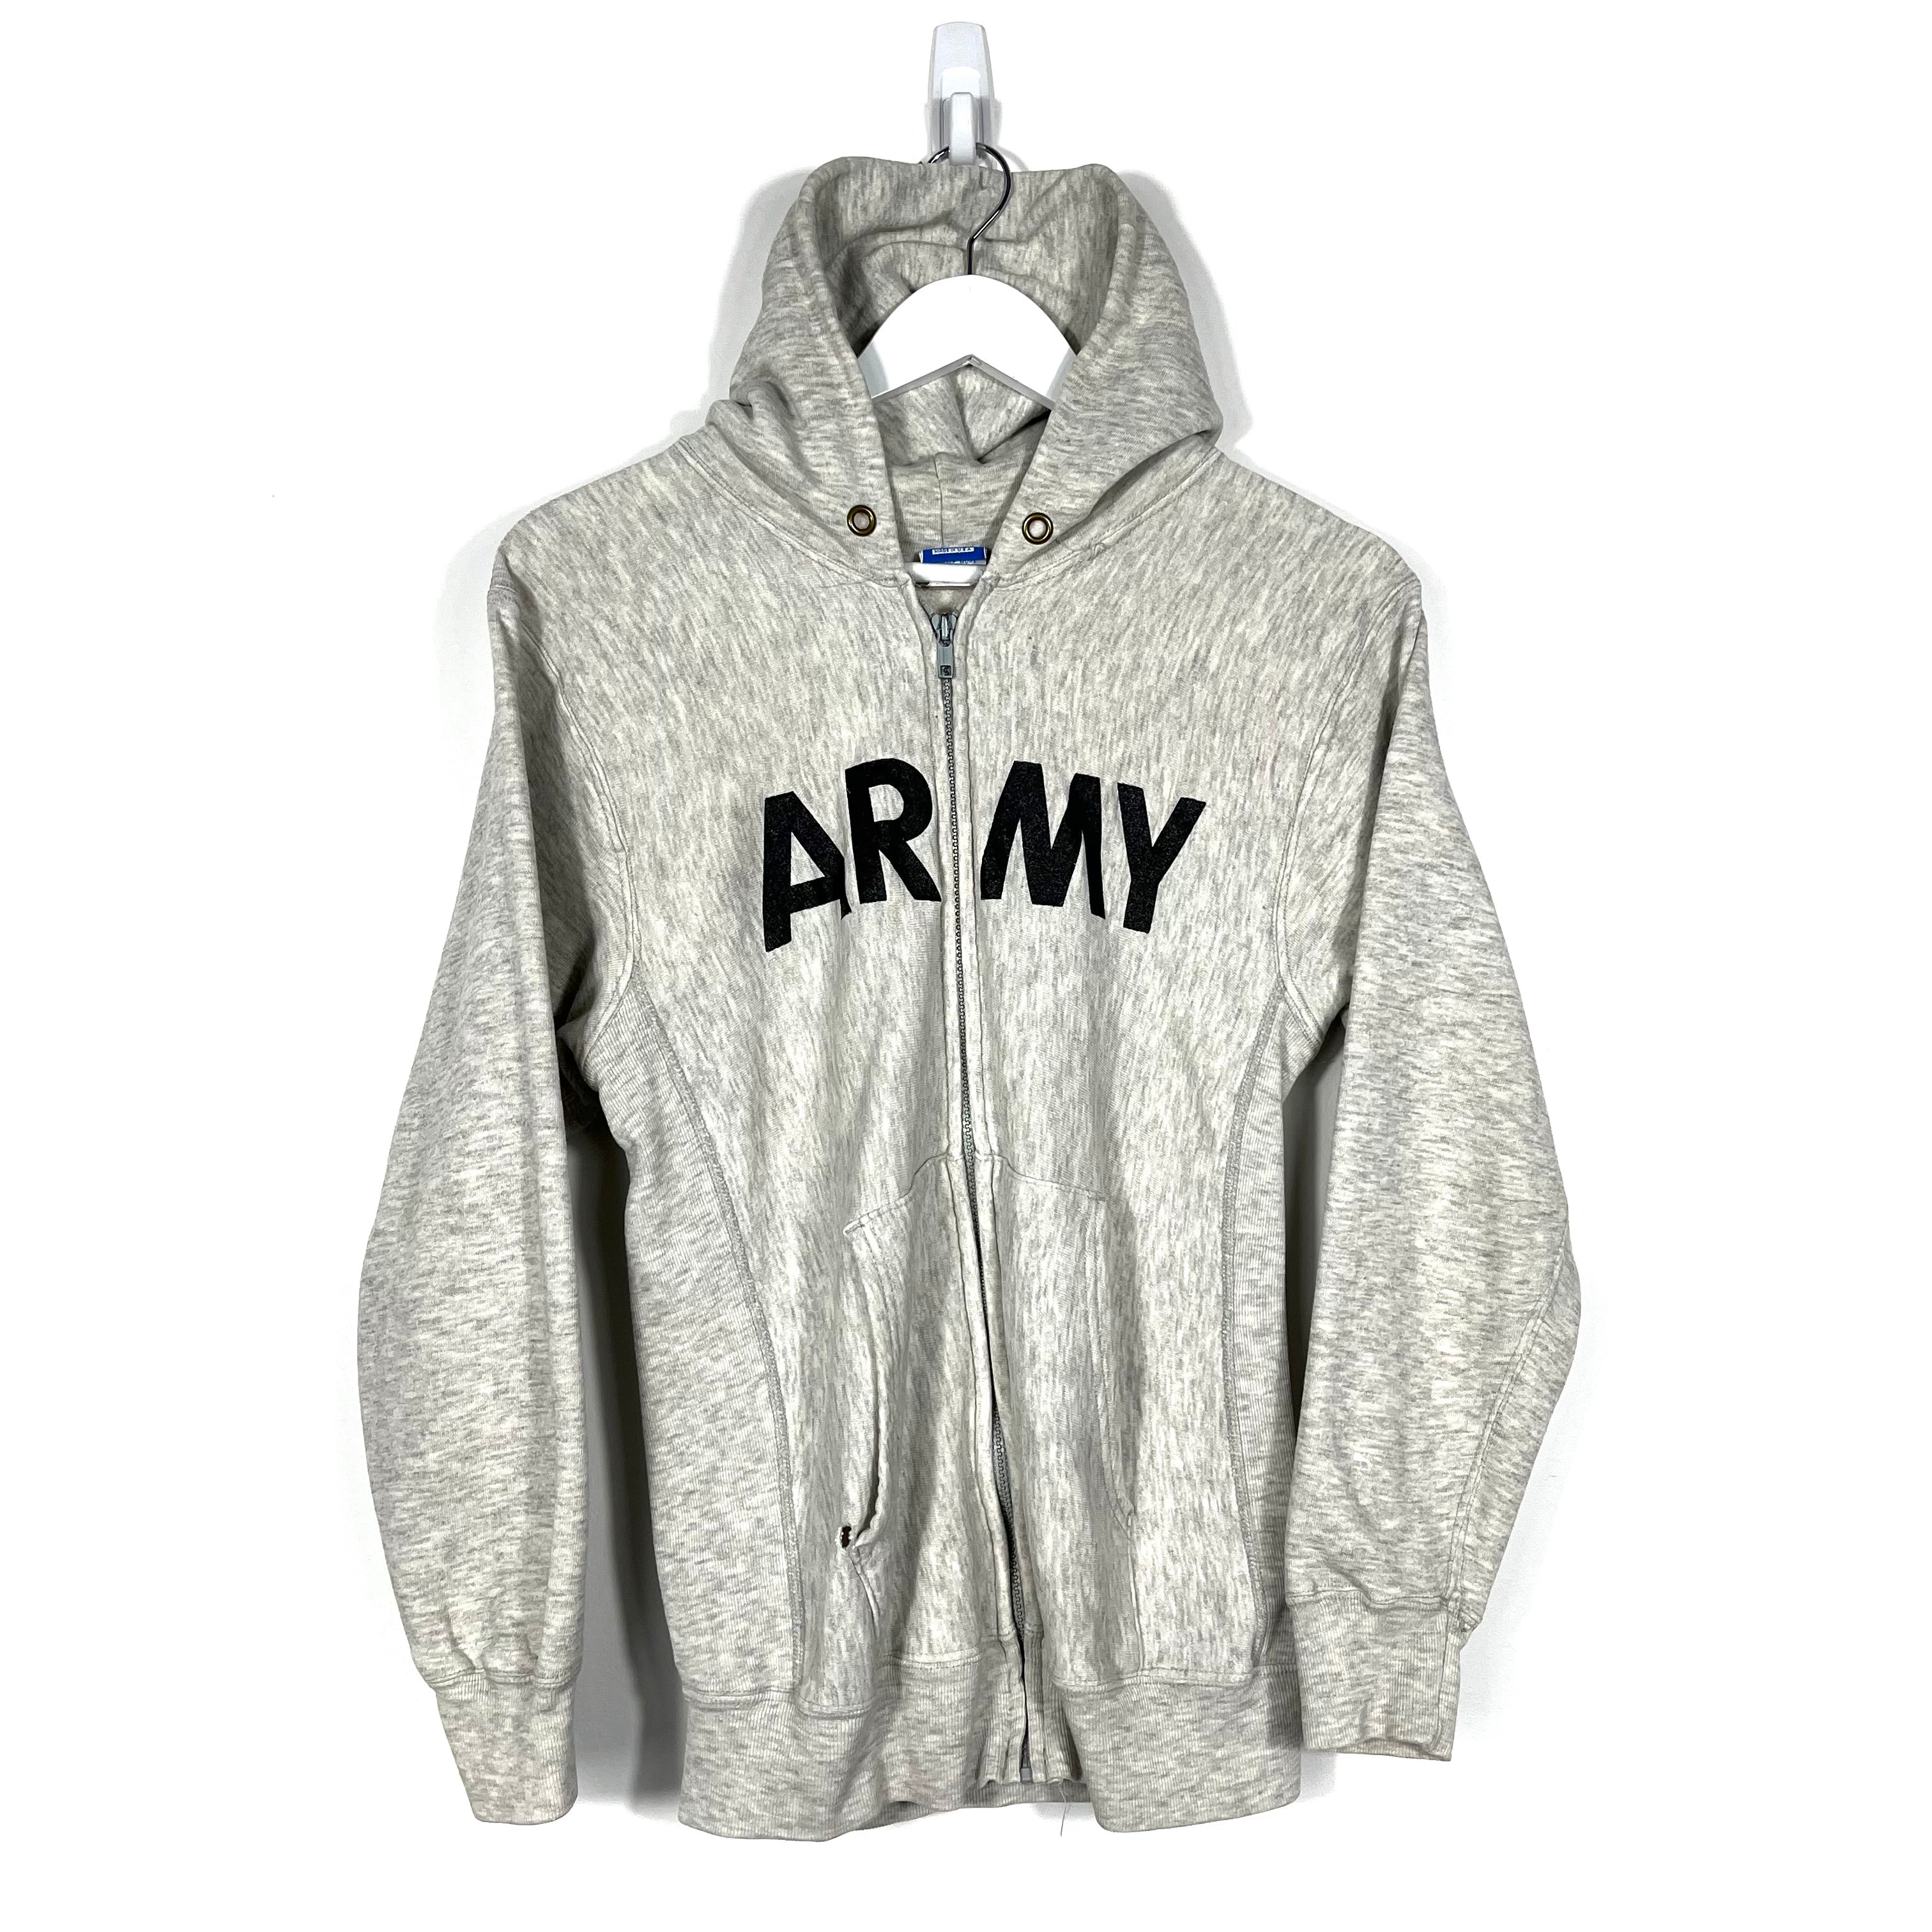 Vintage 80s Champion Army Zip-Up Hoodie - Women's Small